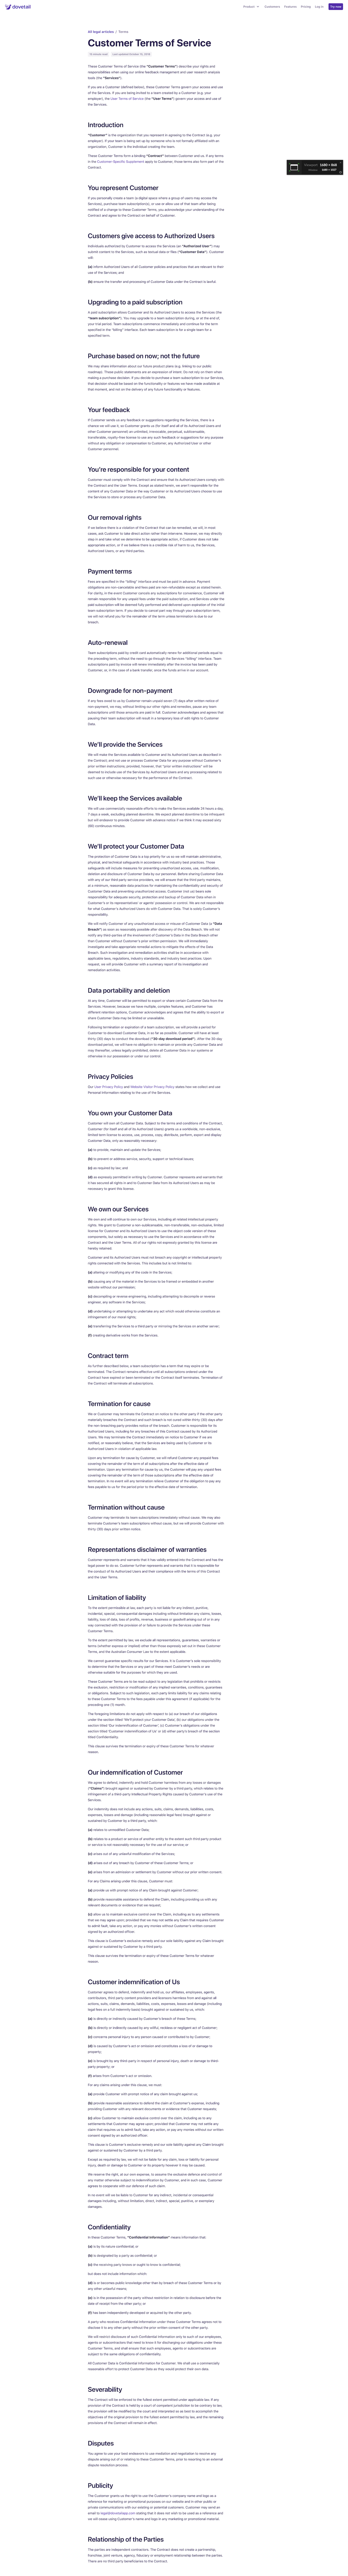 Screenshot of the Terms of Service page from the Dovetail website.